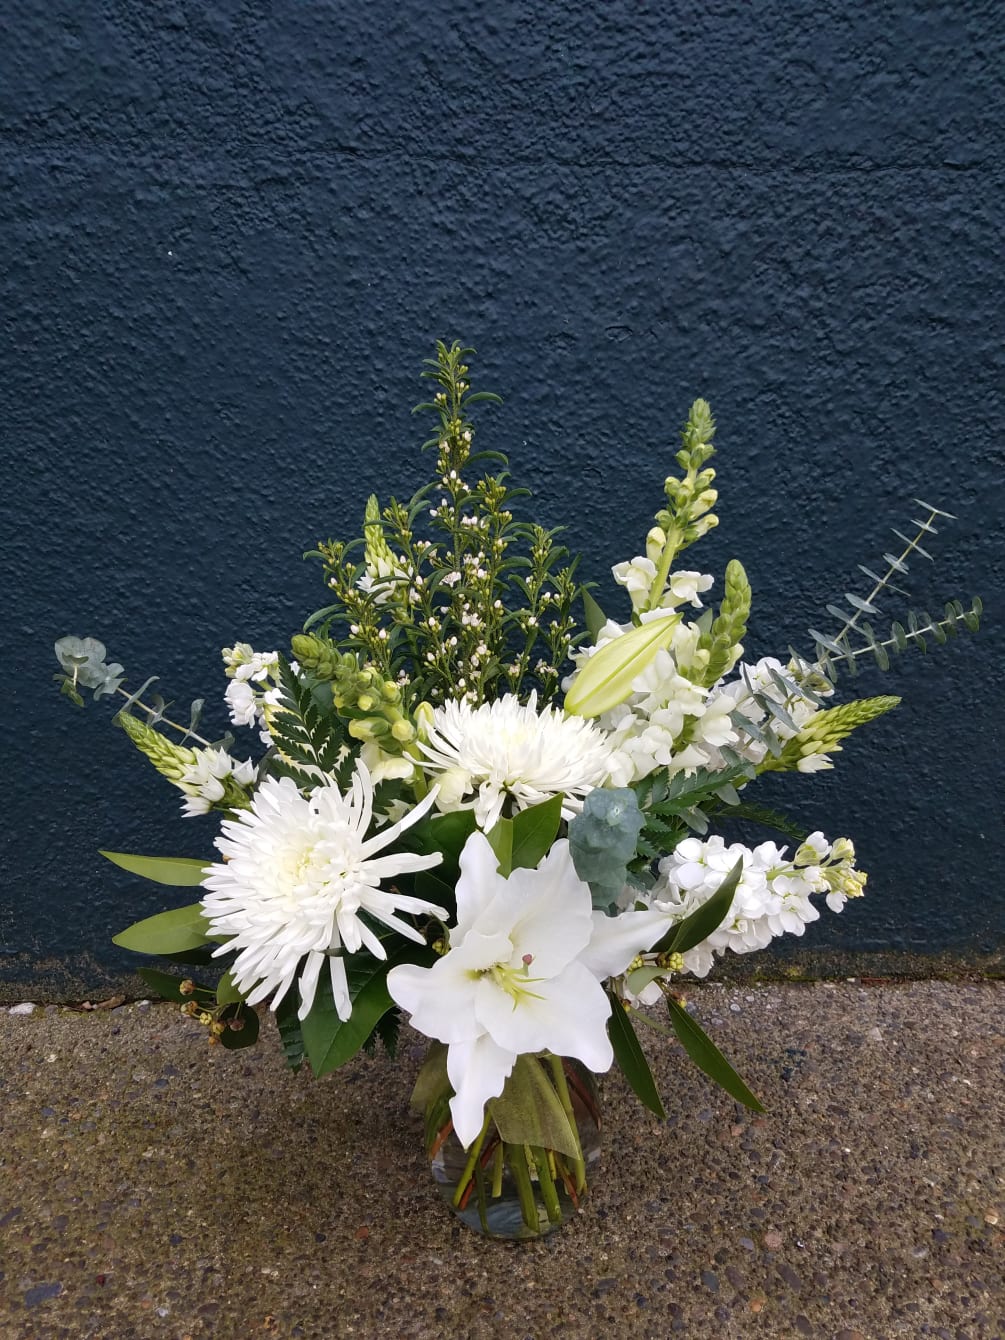 This lush and classy arrangement is a wonderland of dreamy whites and